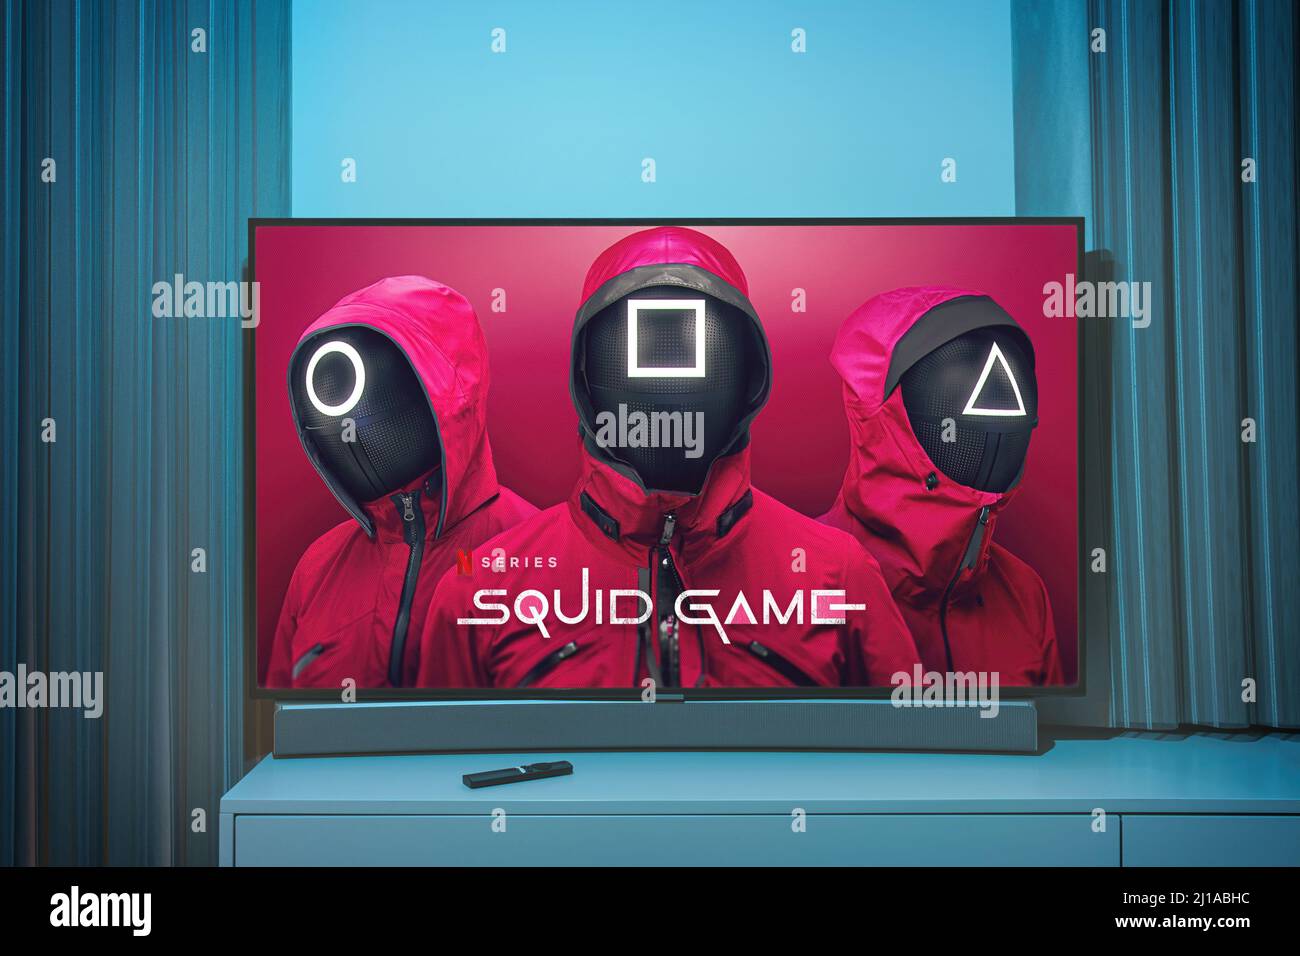 Squid game TV series on big tv screen. Squid game television show at home Stock Photo